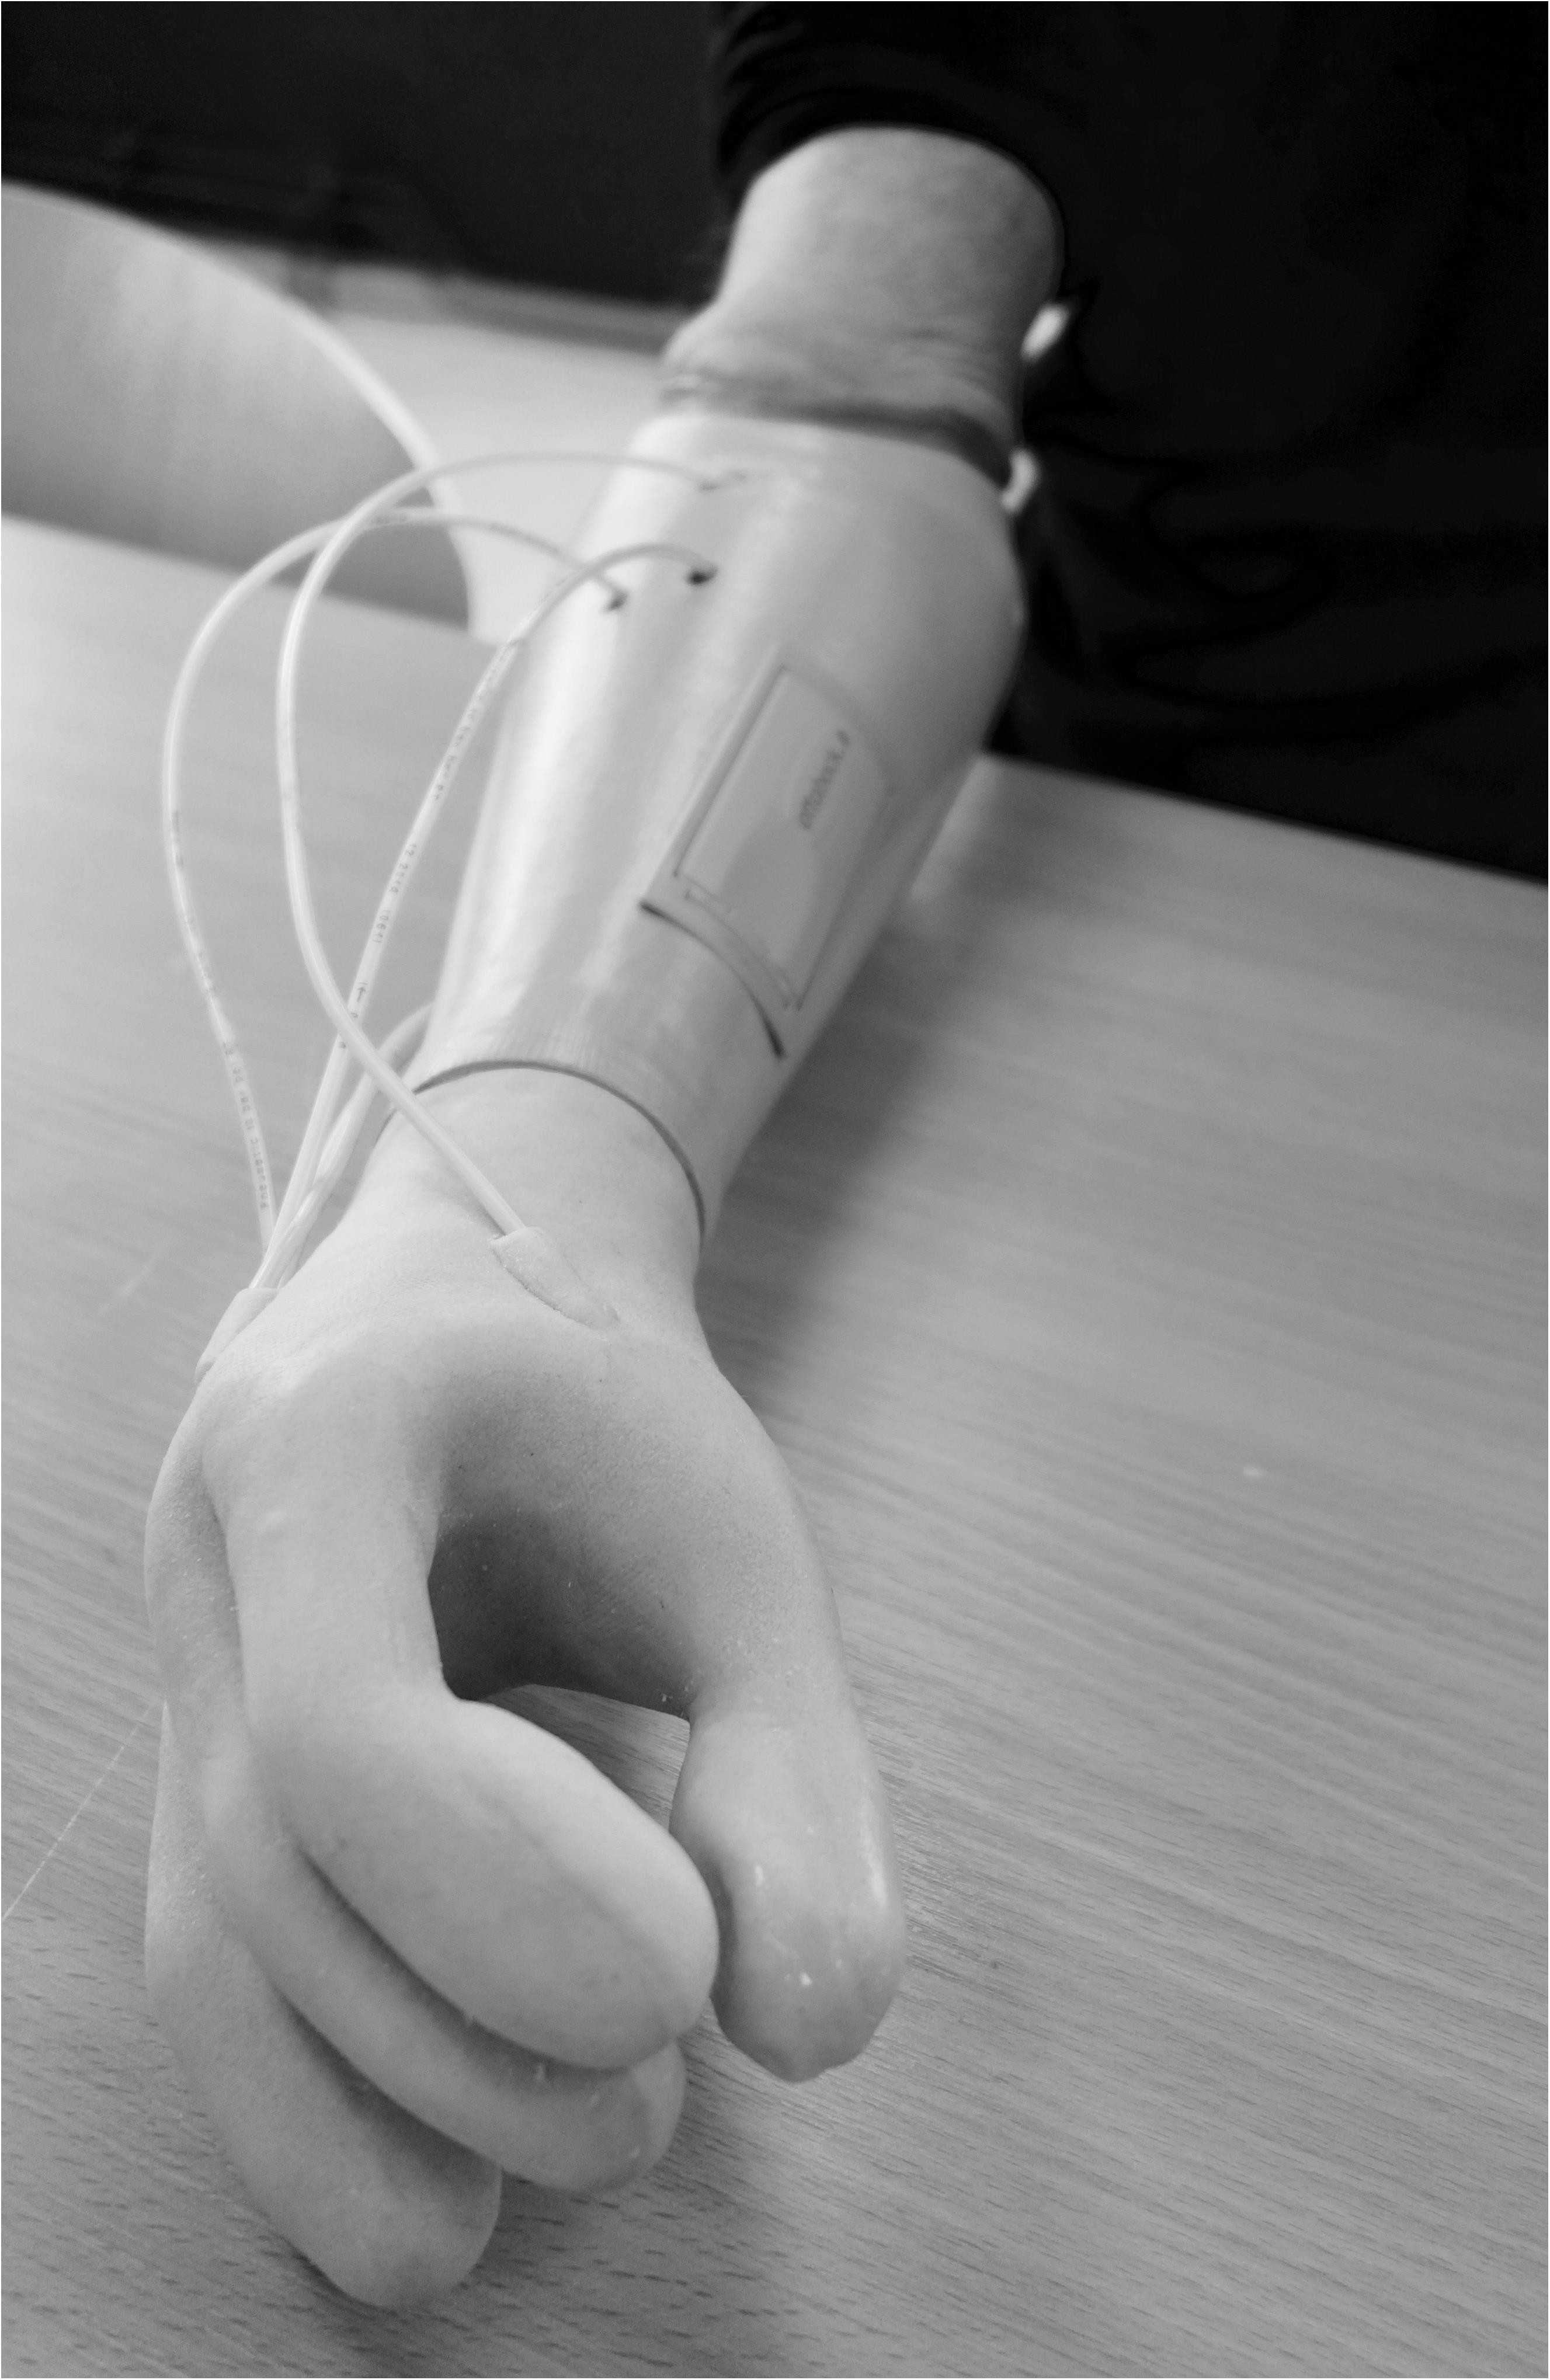 Frontiers  Sensory Feedback in Hand Prostheses: A Prospective